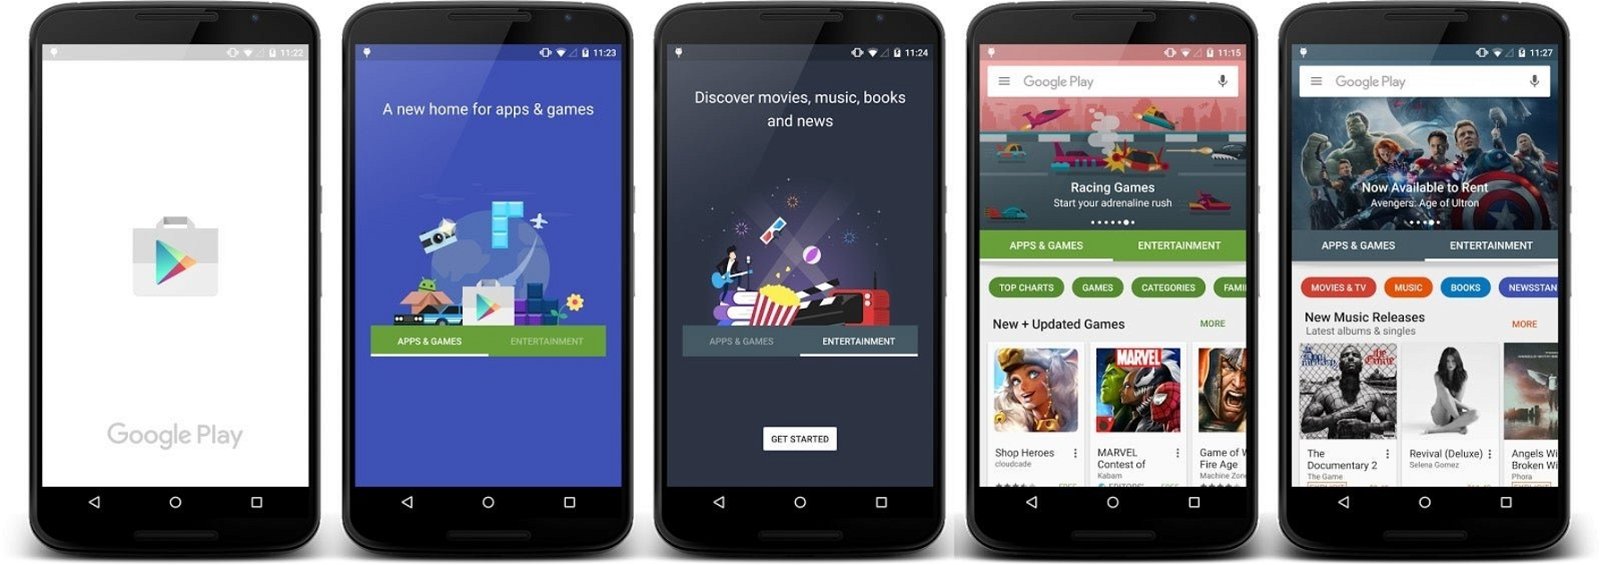 Google Play redesign